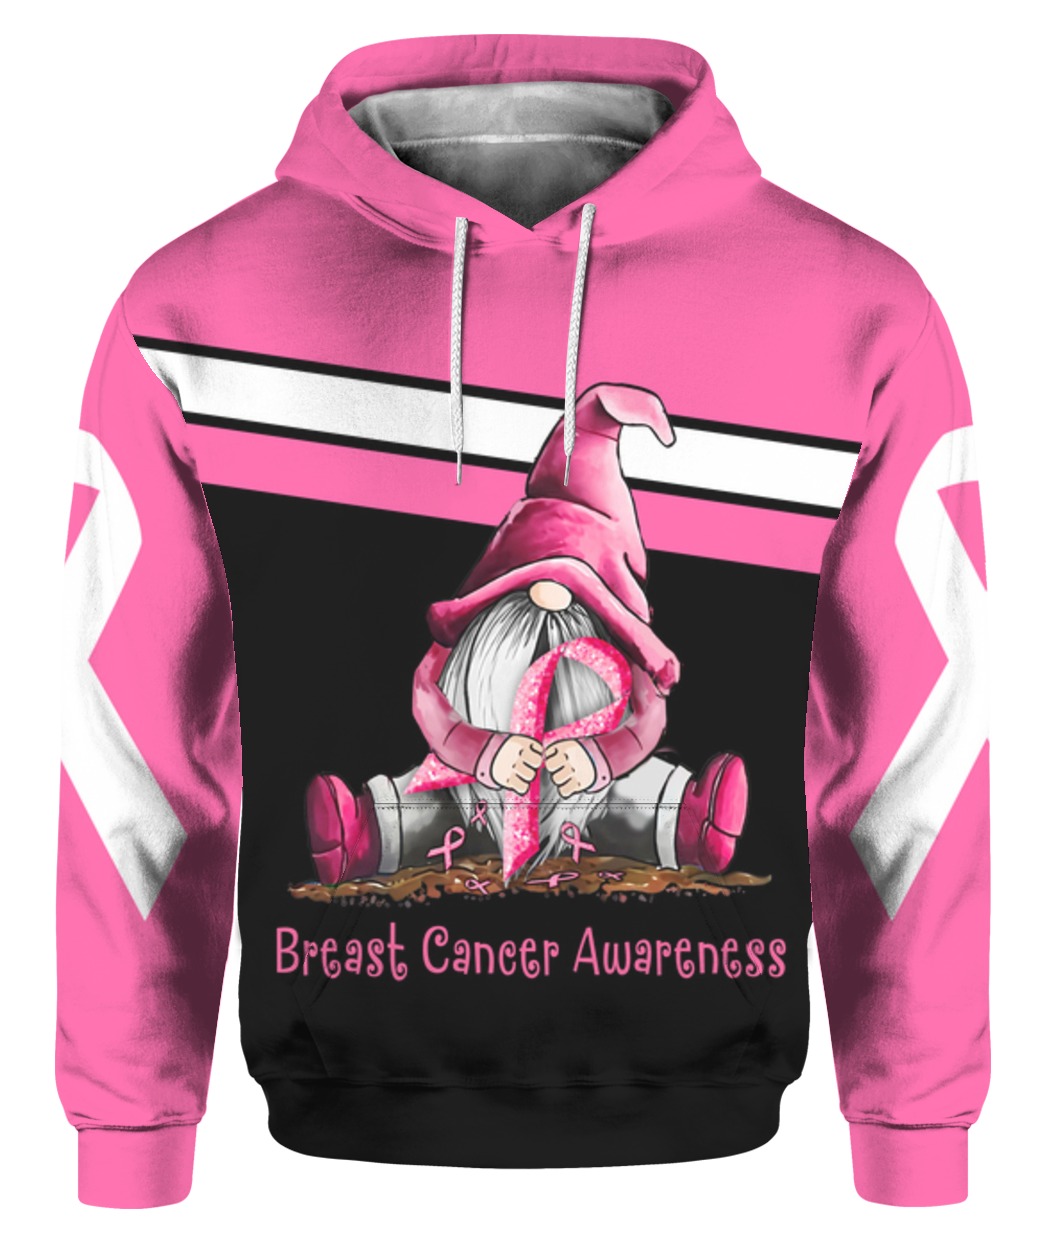 Breast Cancer Awareness Gnome 3d hoodie, shirt and sweatshirt